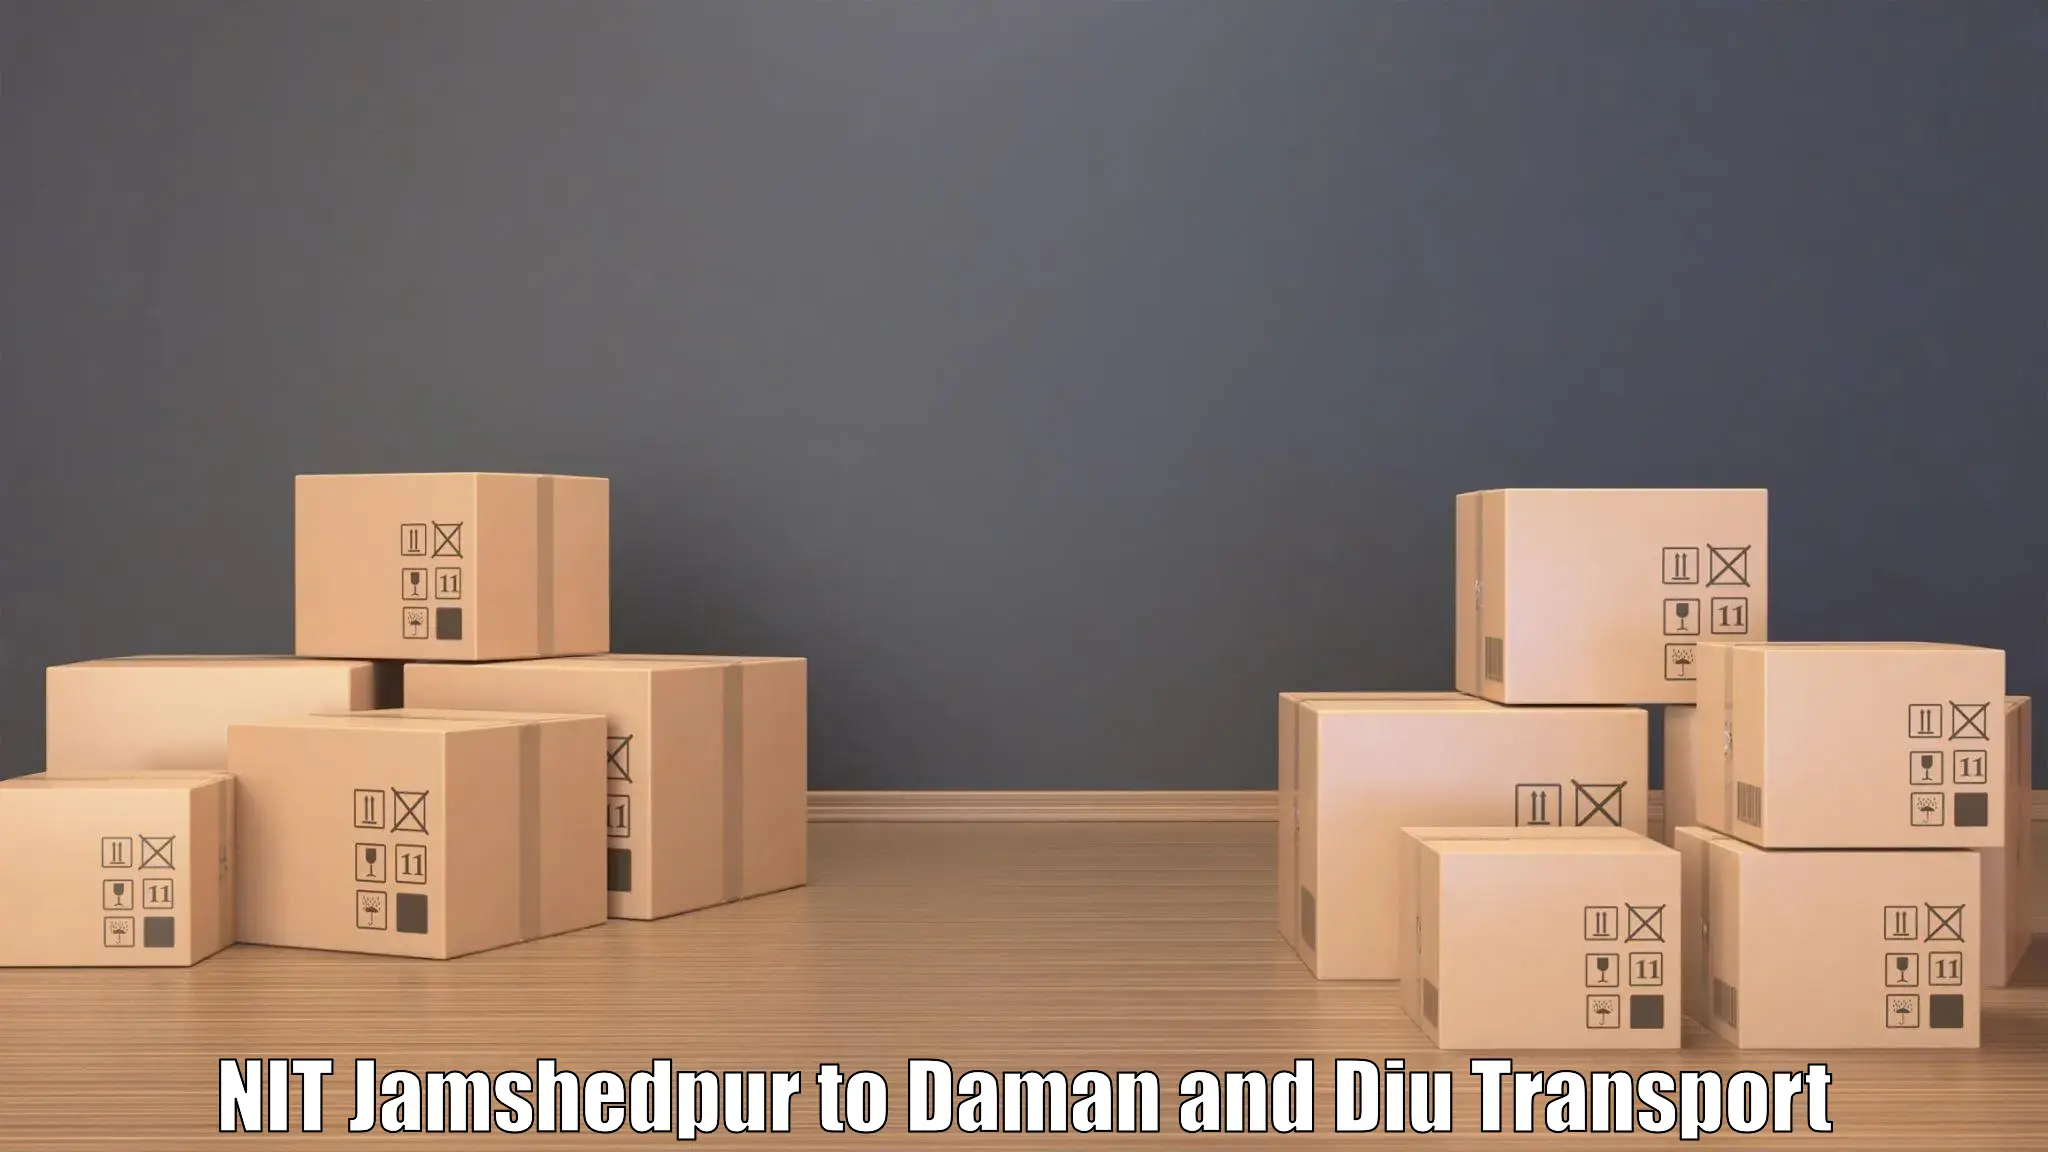 Air cargo transport services NIT Jamshedpur to Diu